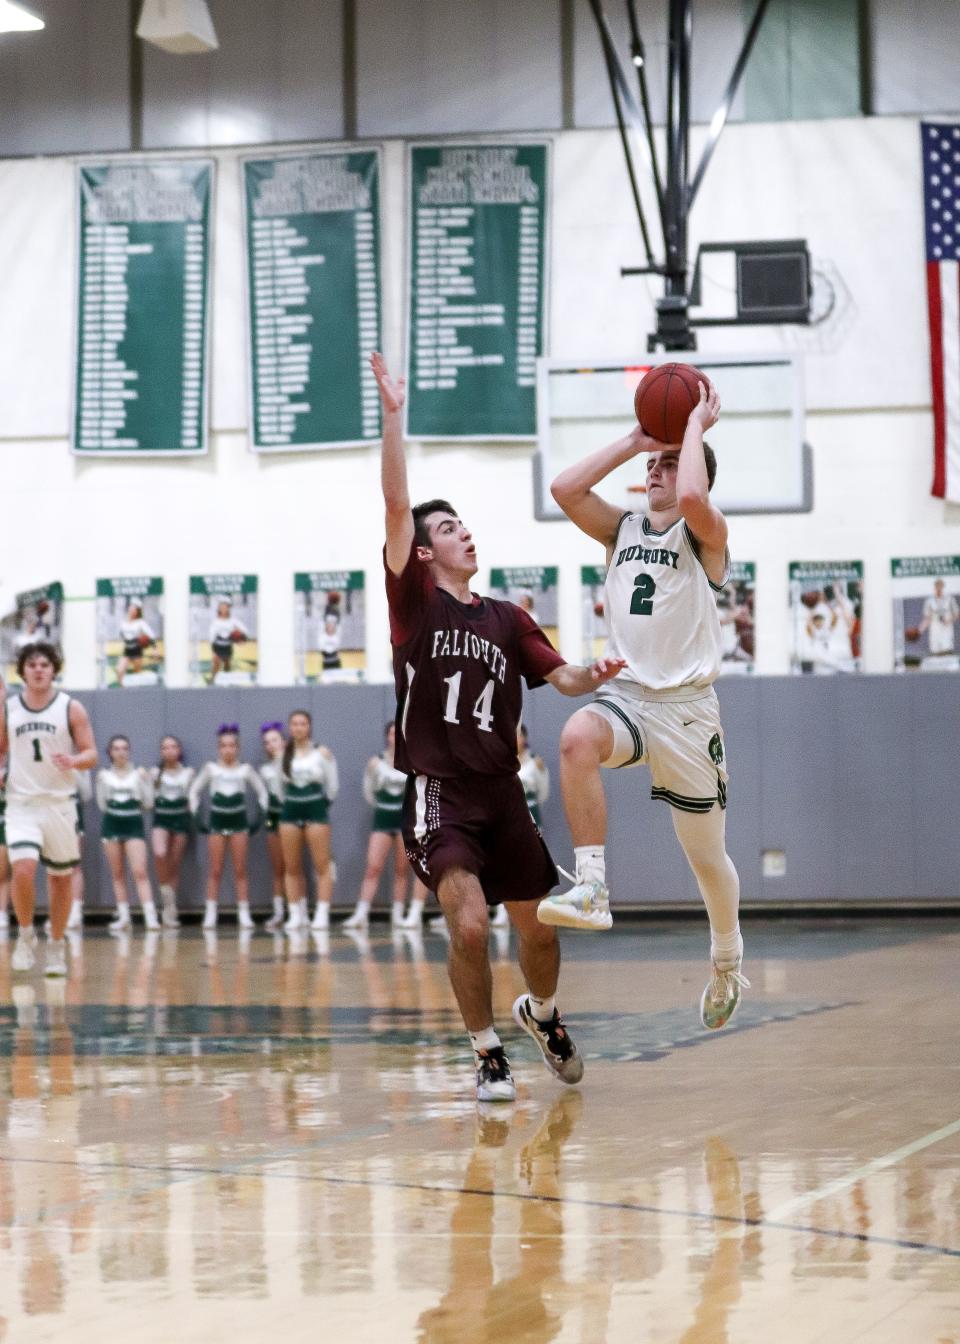 Duxbury's Trevor Jones shoots the ball at the end of a quarter during a game against Falmouth on Friday, Feb. 17, 2023.